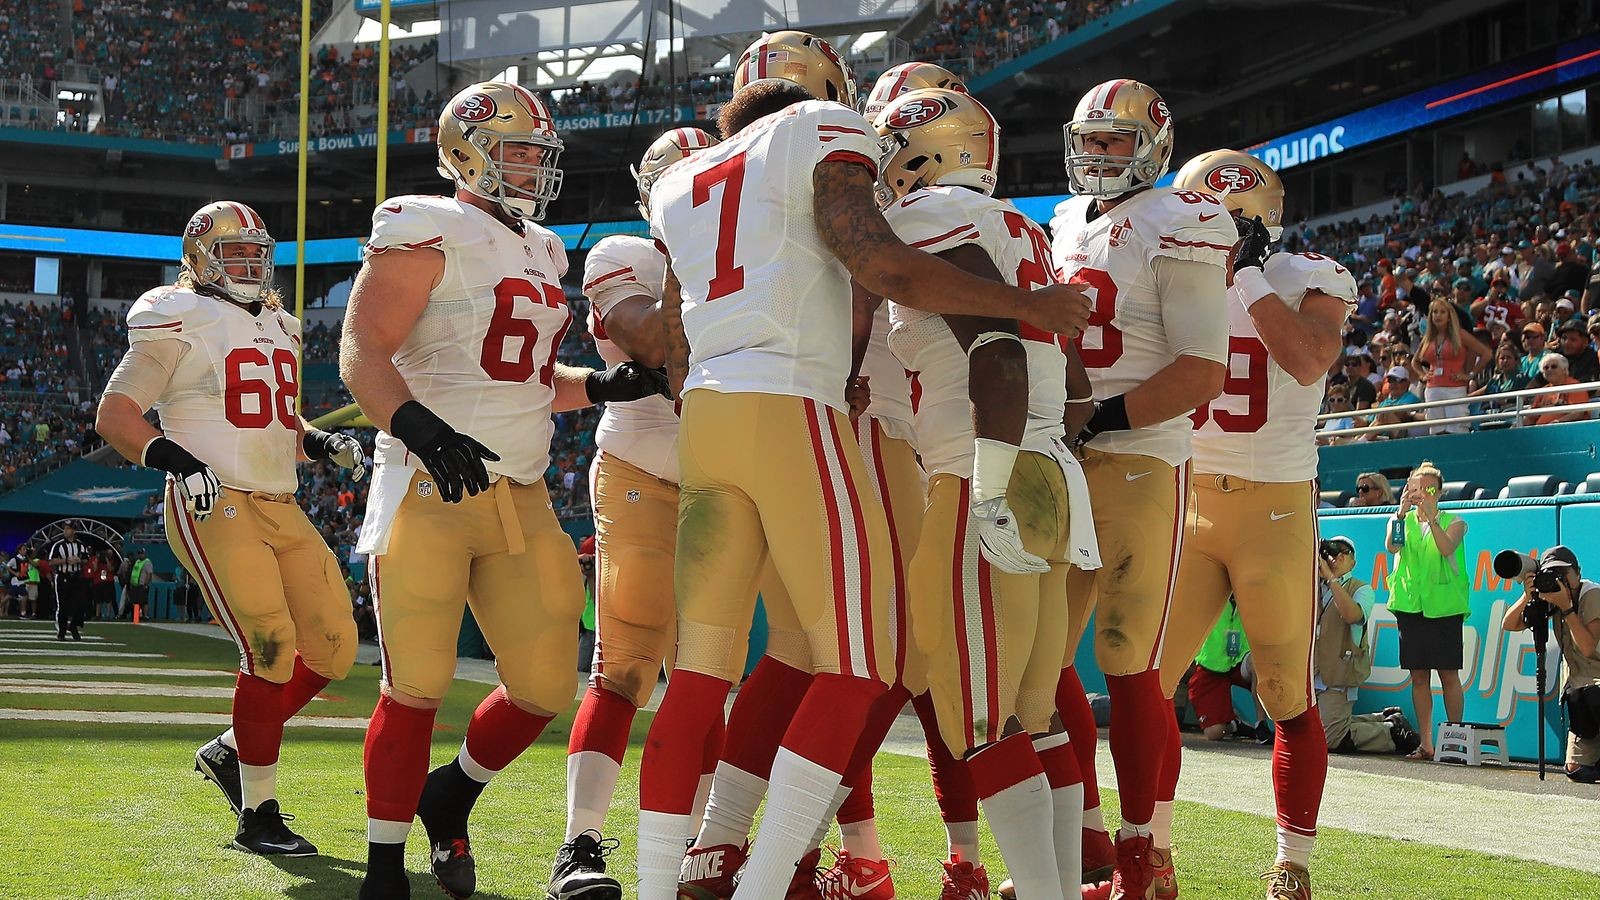 49ers lose franchiserecord 10th straight game, officially eliminated